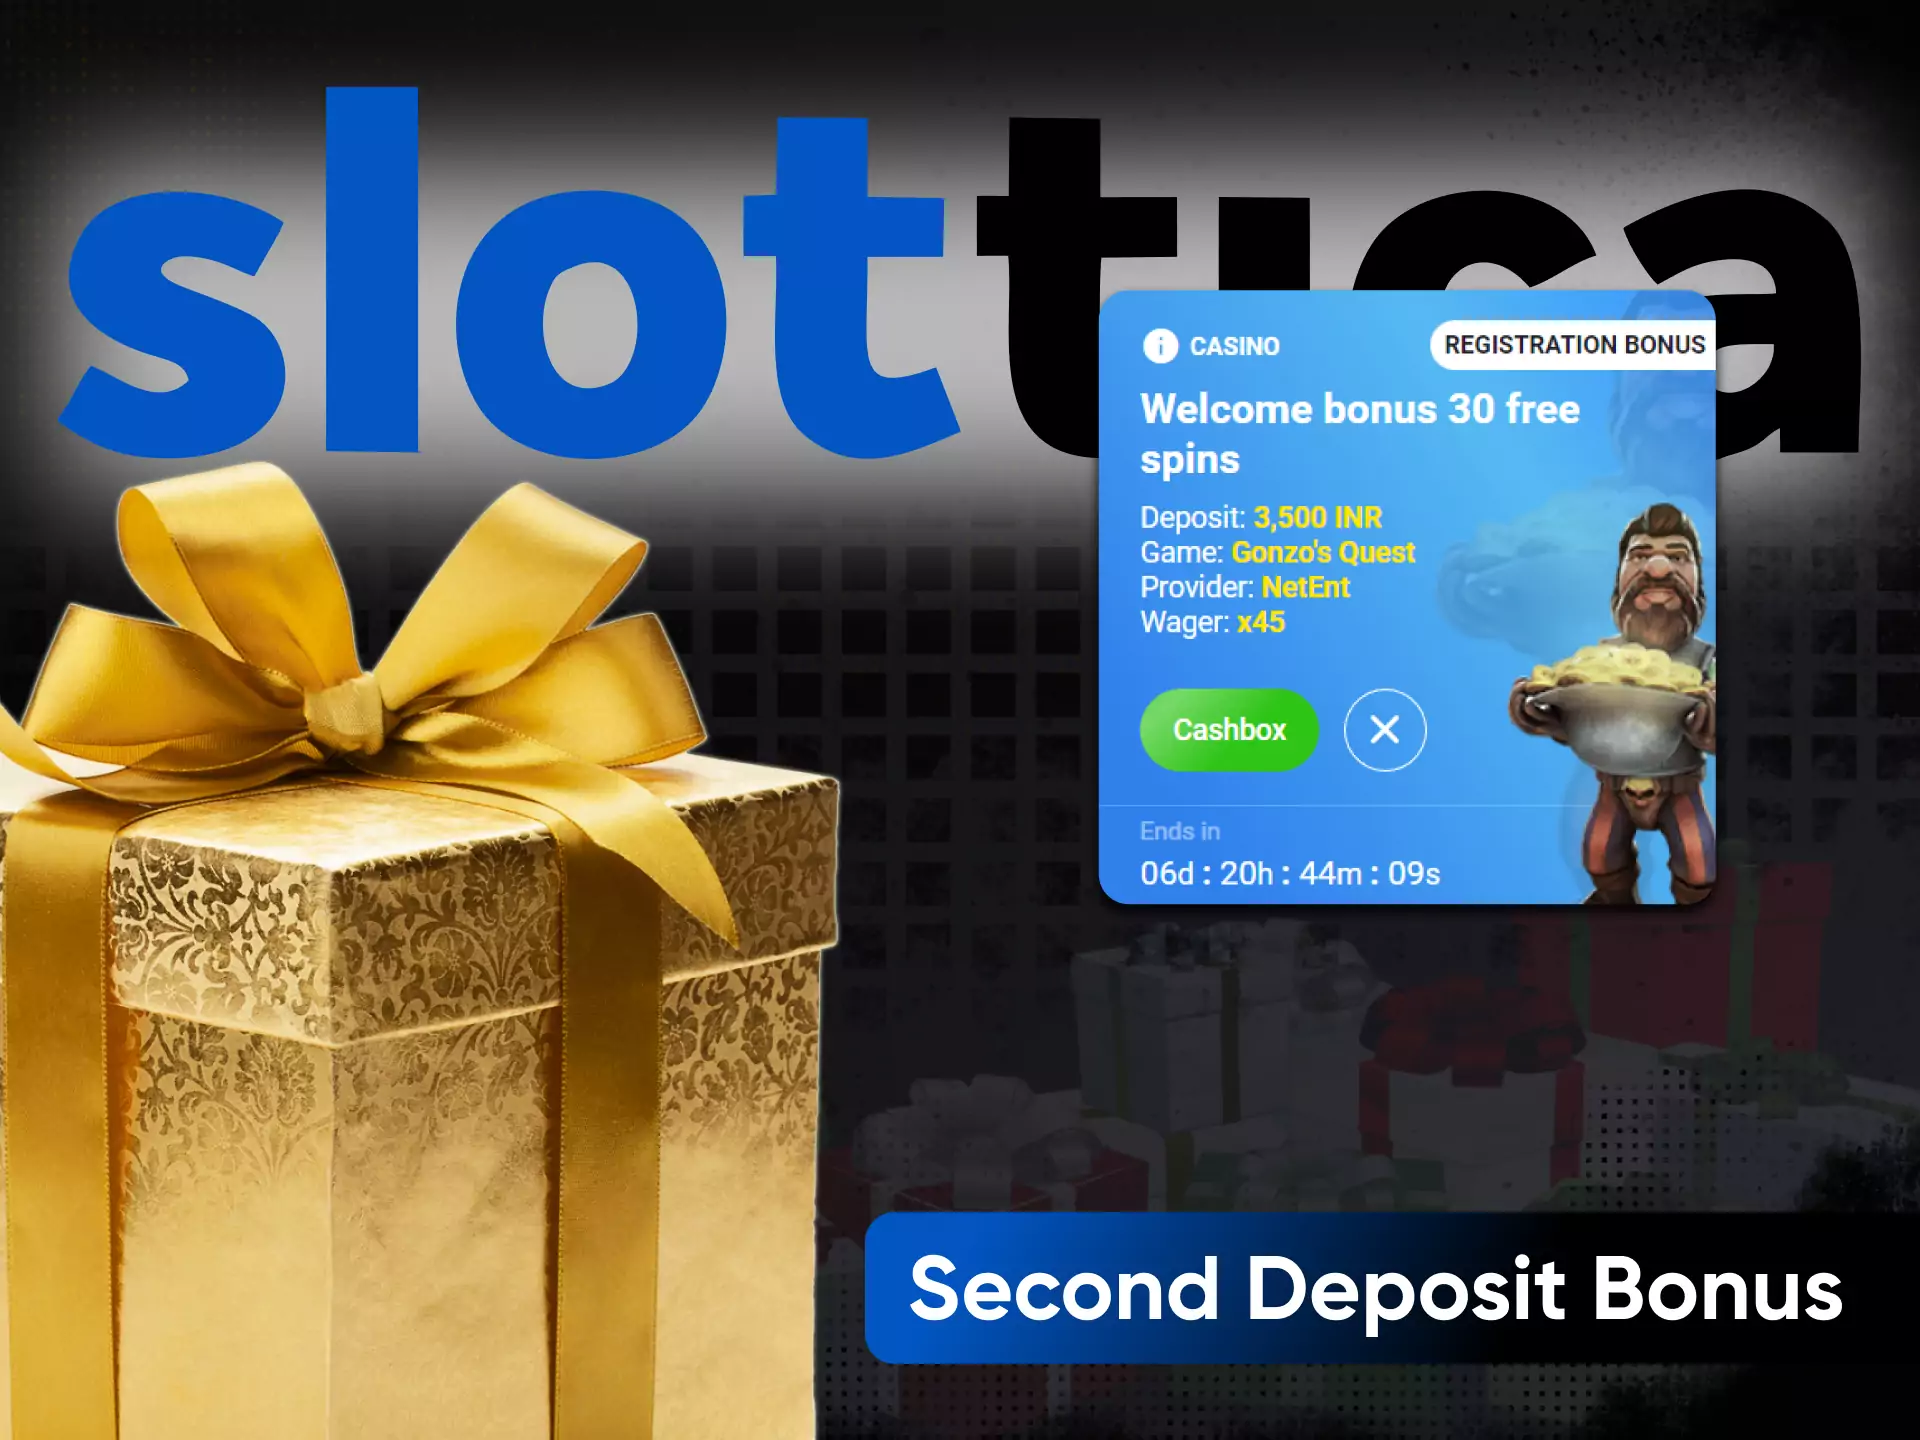 After you make the second deposit to your Slottica account, you can get an additional bonus from Slottica.